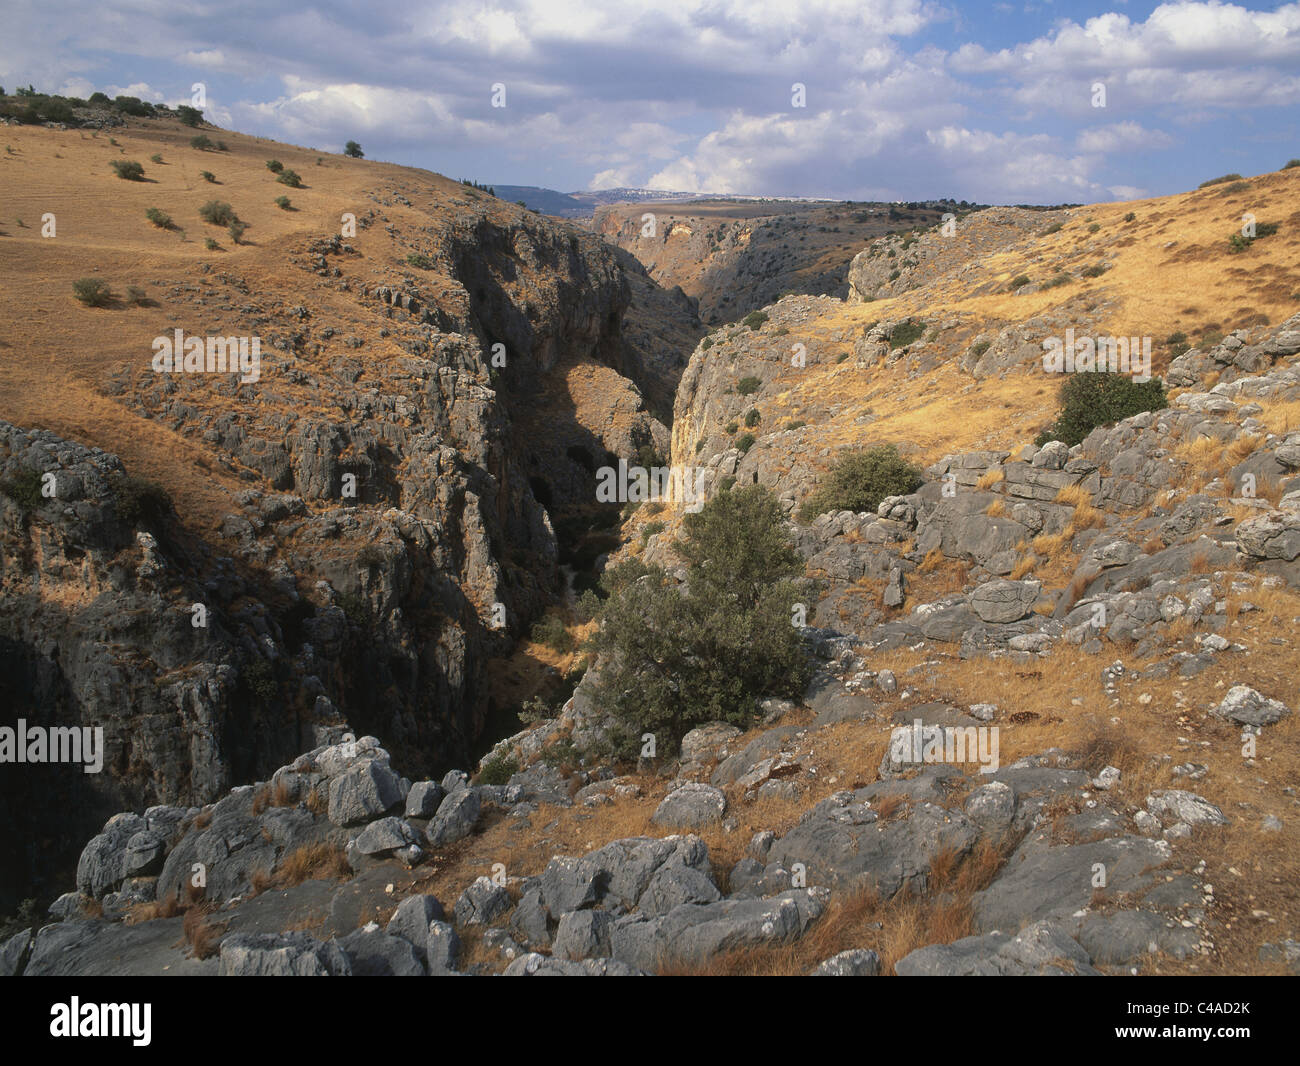 Aerial photograph of the Amud stream in the Lower Galilee Stock Photo